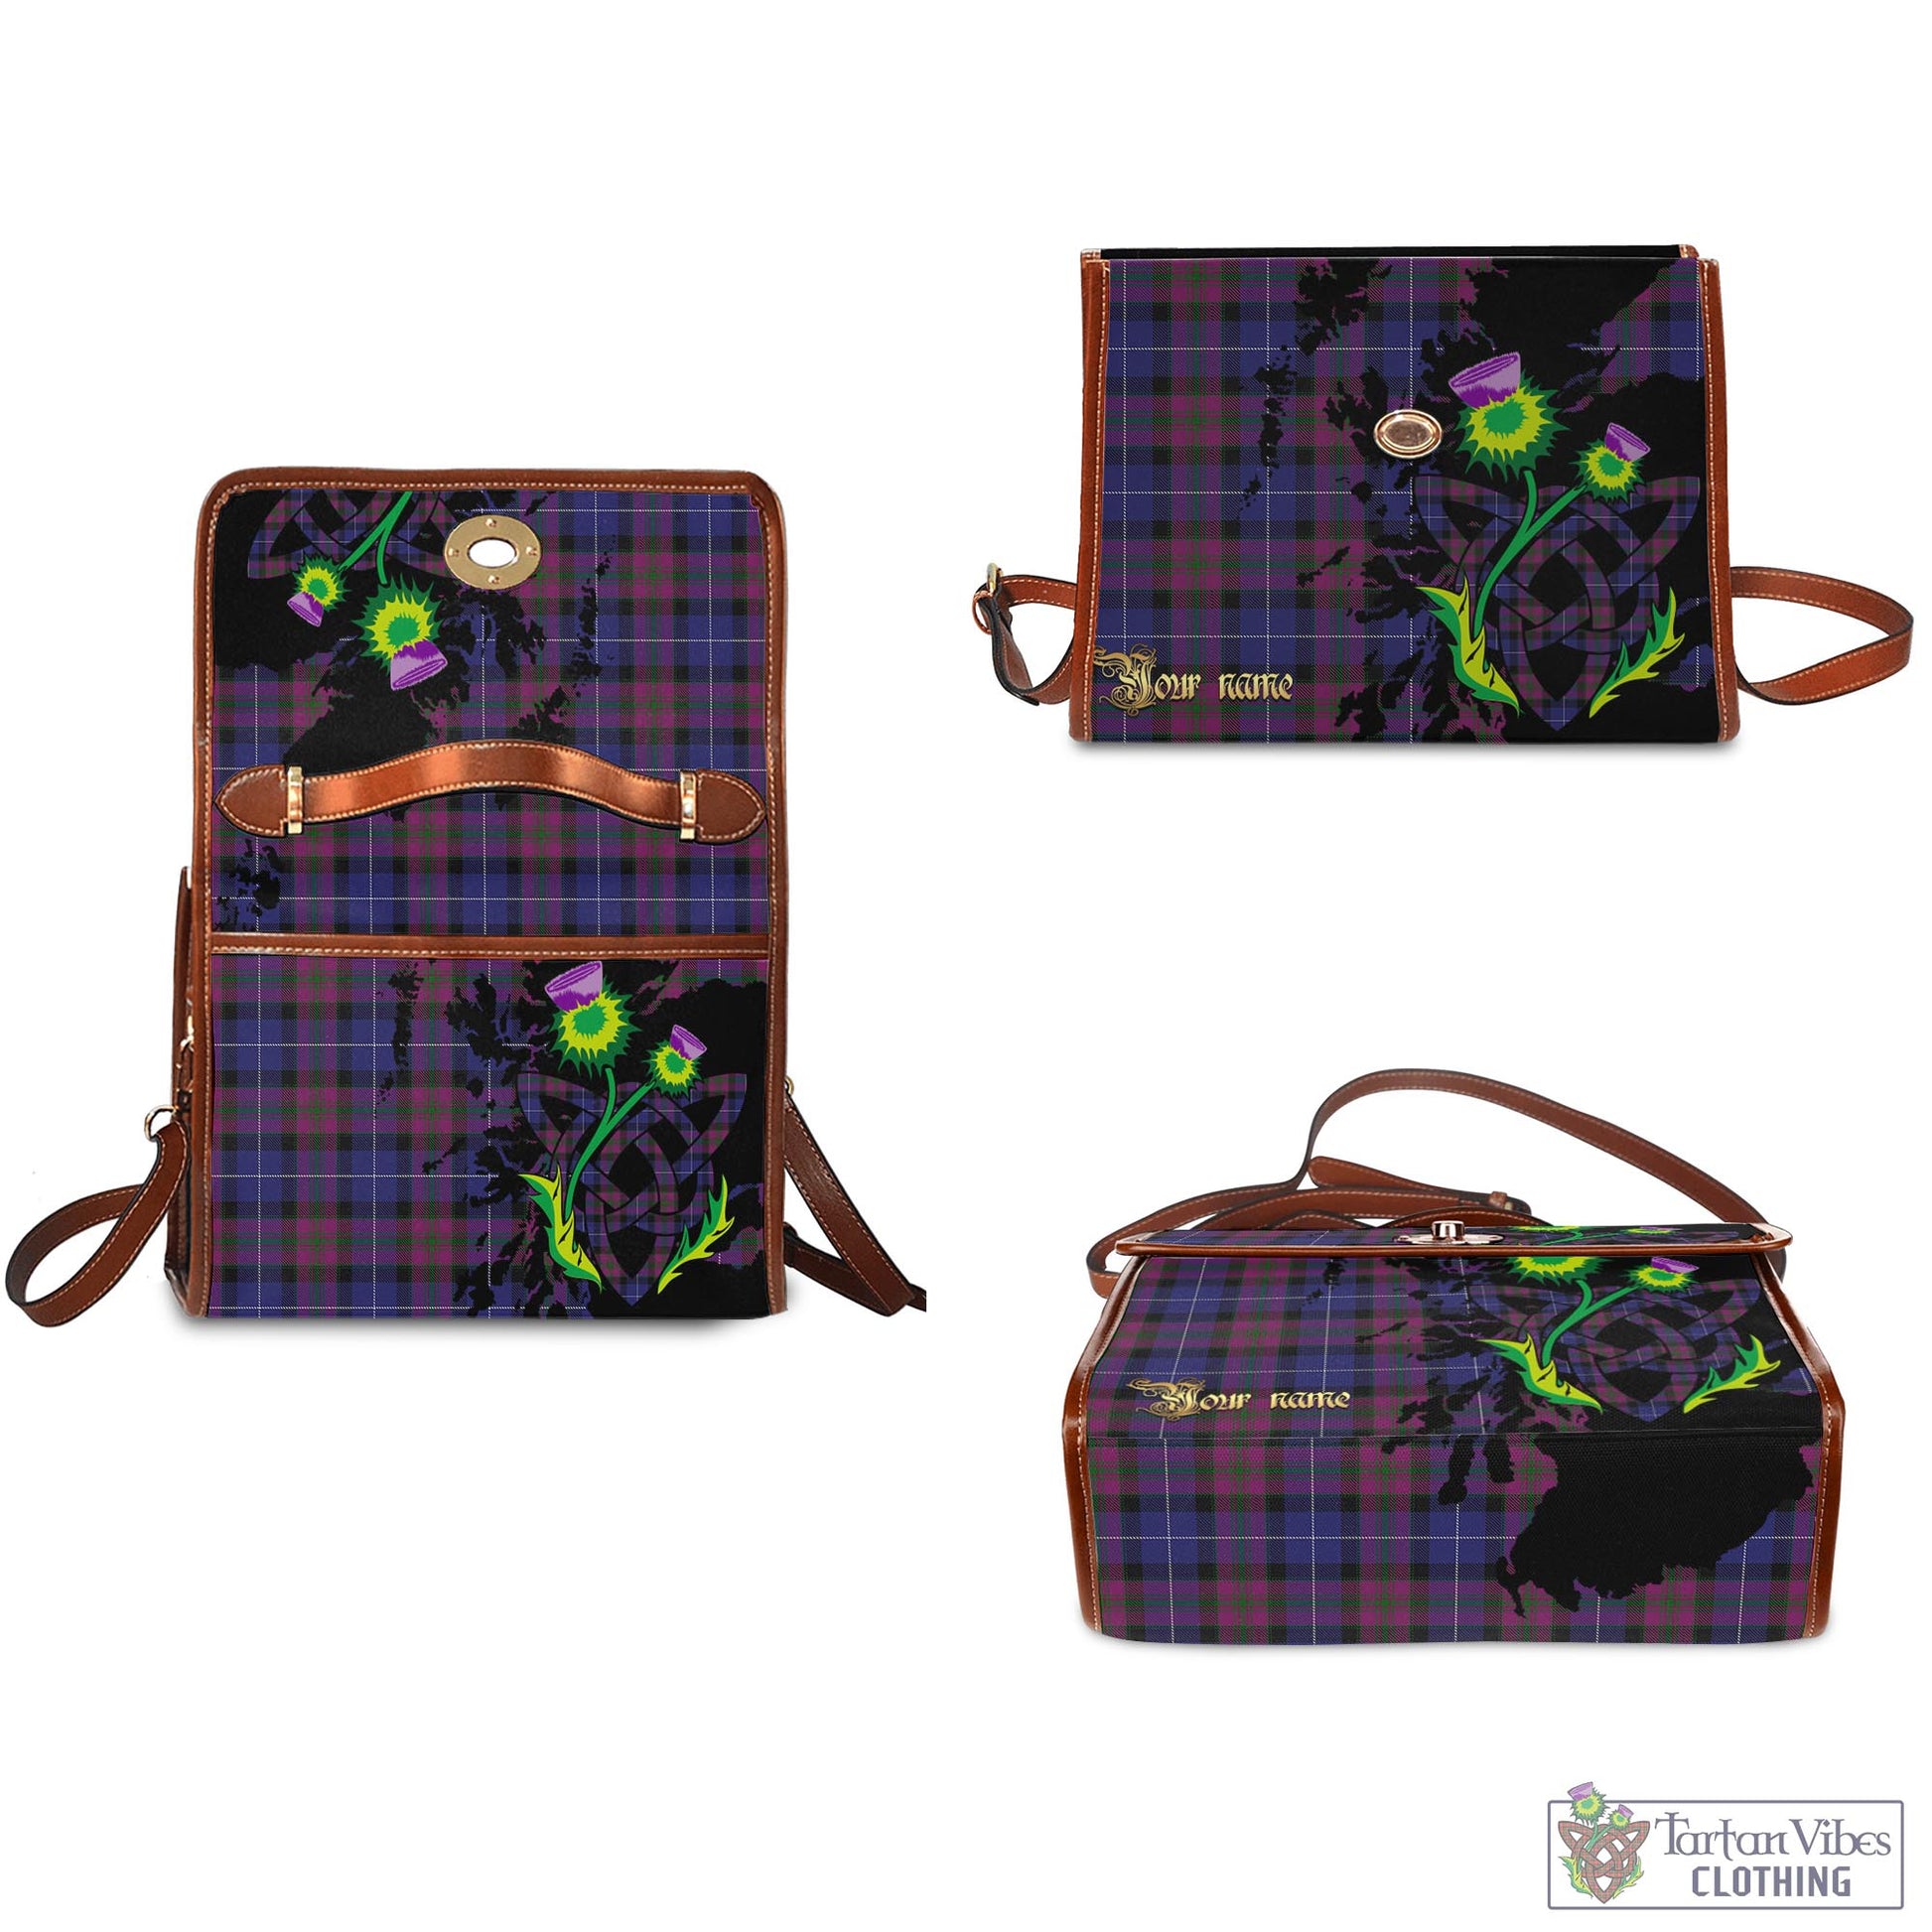 Tartan Vibes Clothing Pride of Scotland Tartan Waterproof Canvas Bag with Scotland Map and Thistle Celtic Accents